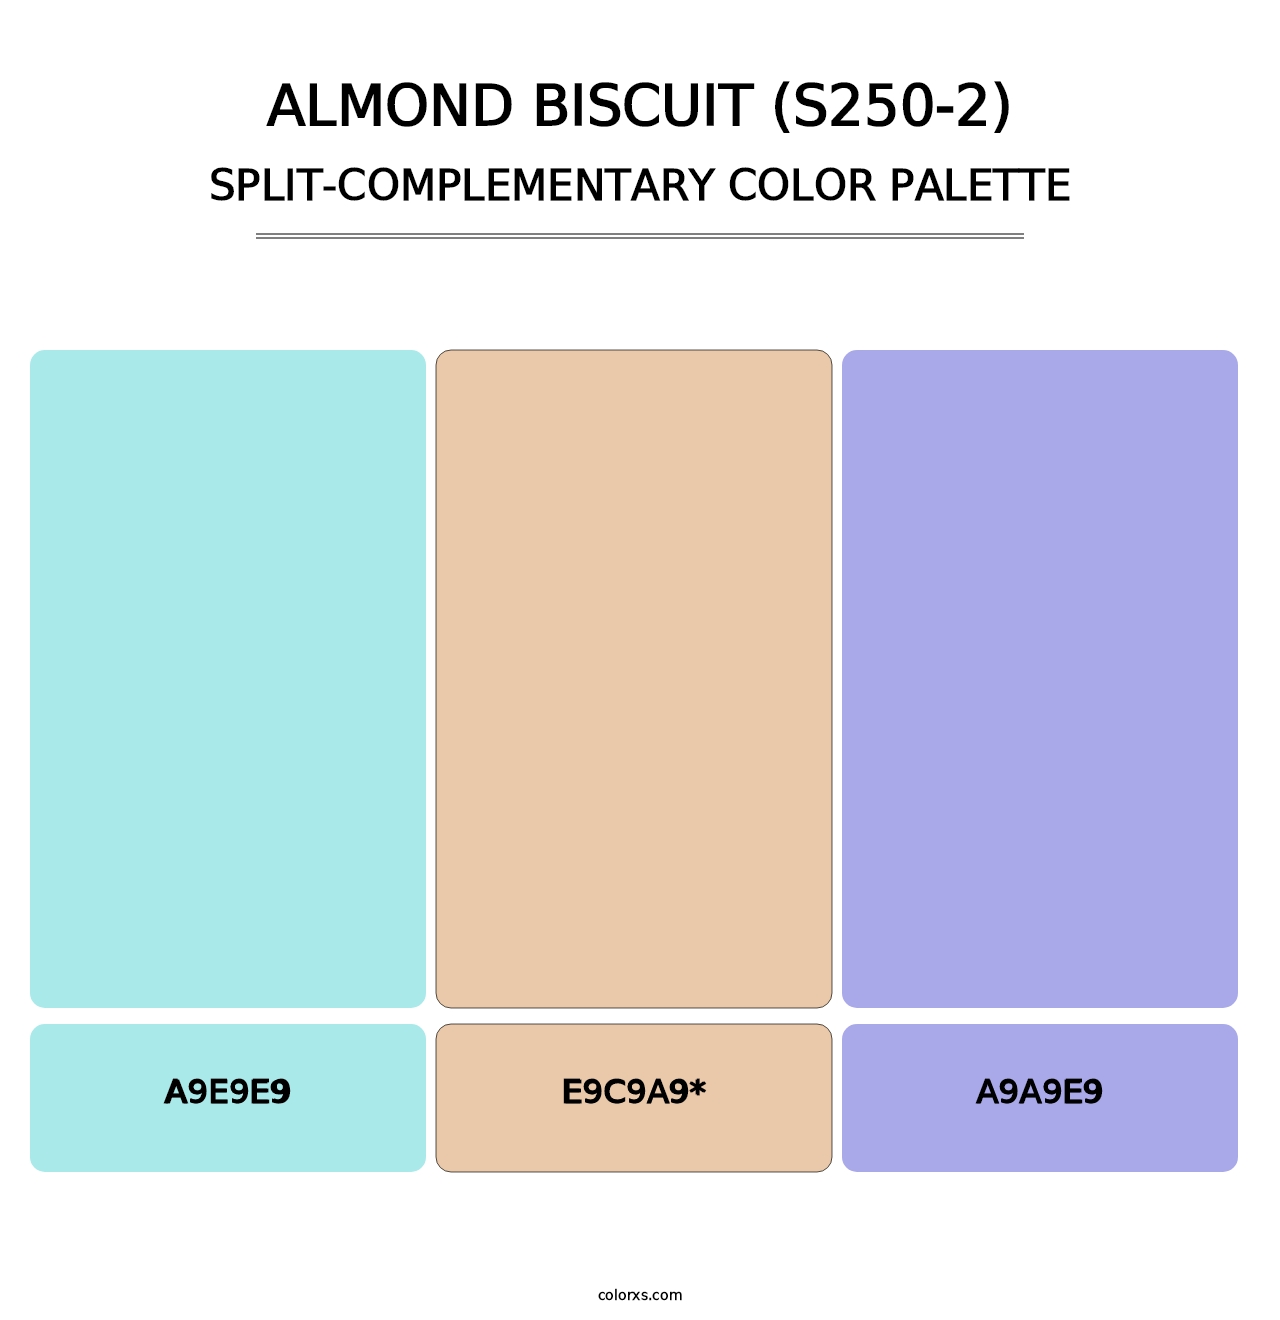 Almond Biscuit (S250-2) - Split-Complementary Color Palette